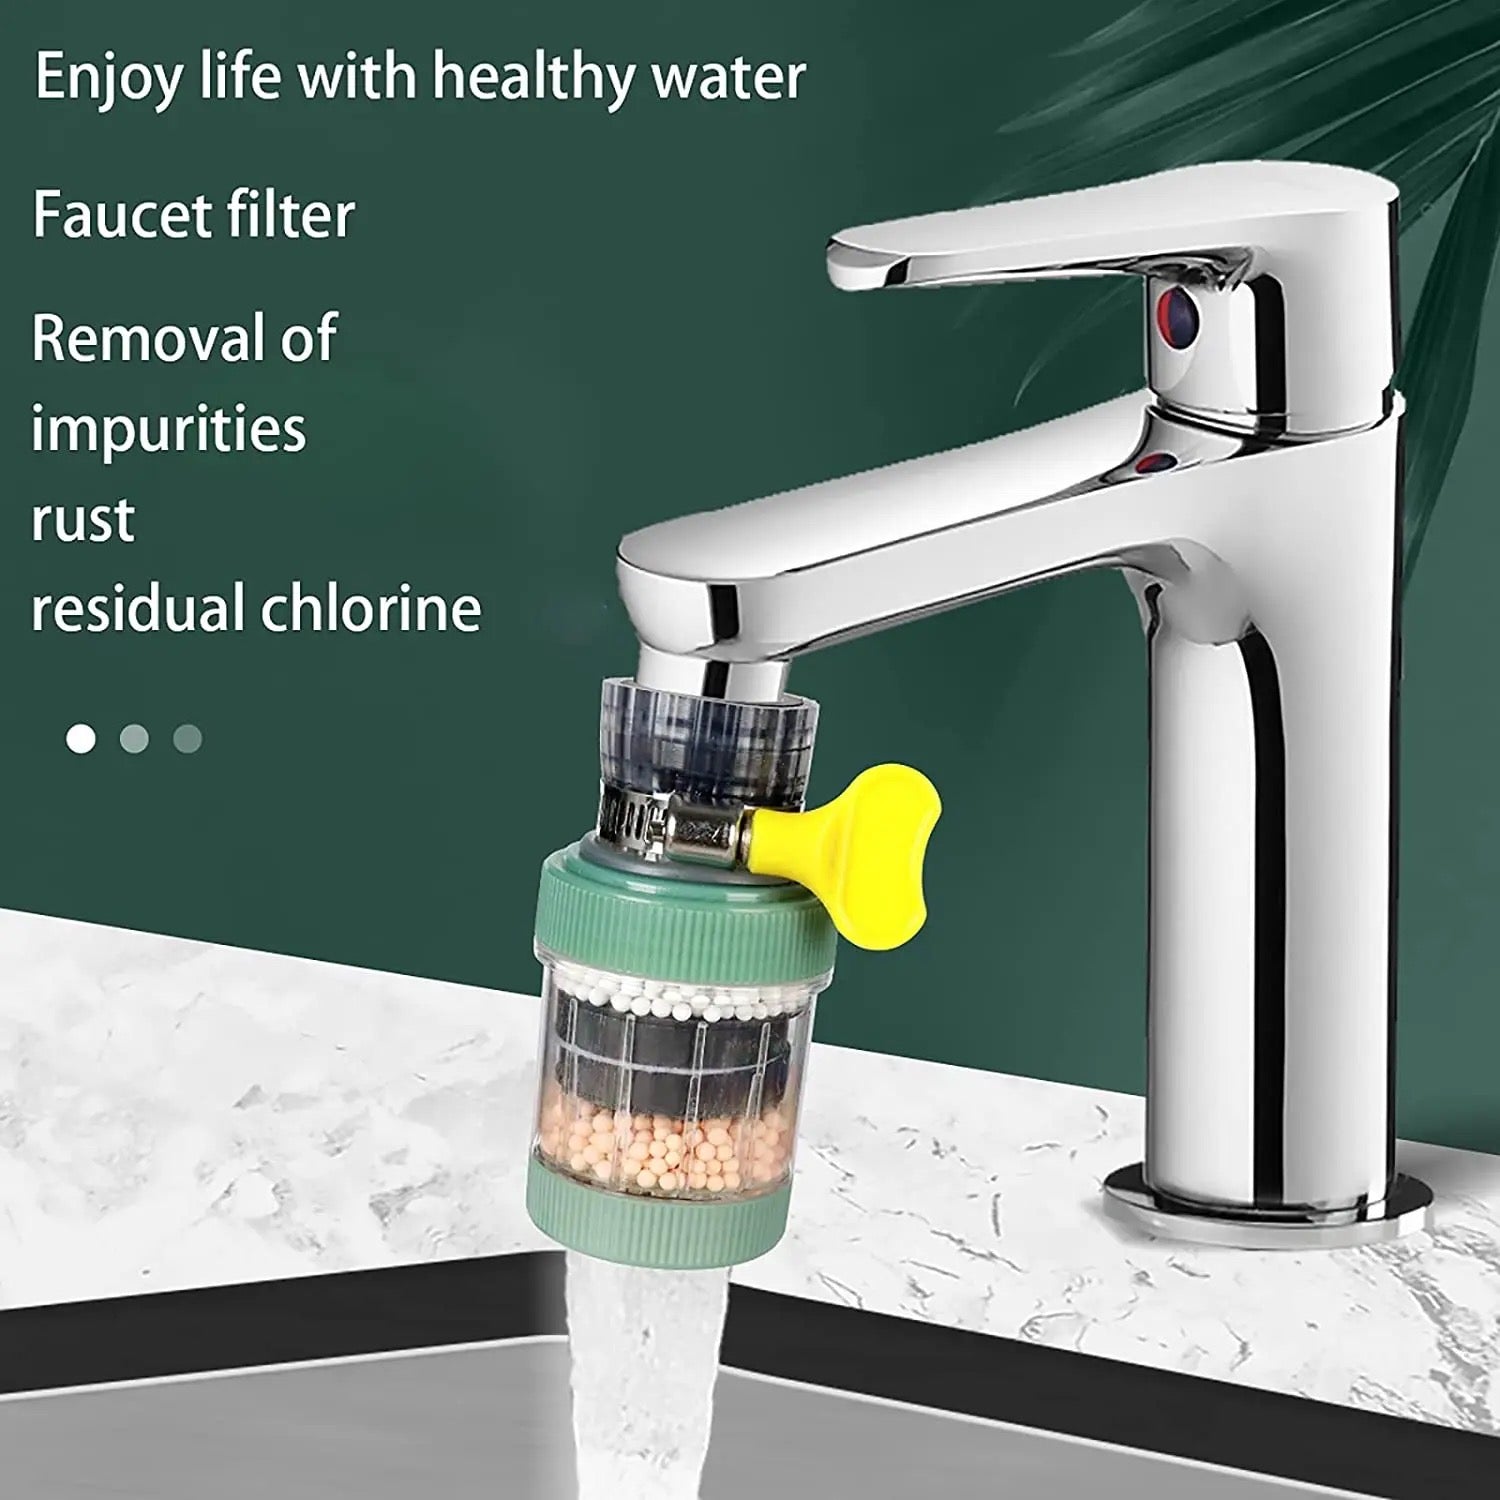 A faucet water purifier designed for kitchen sinks, effectively filtering water for a cleaner and healthier drinking experience